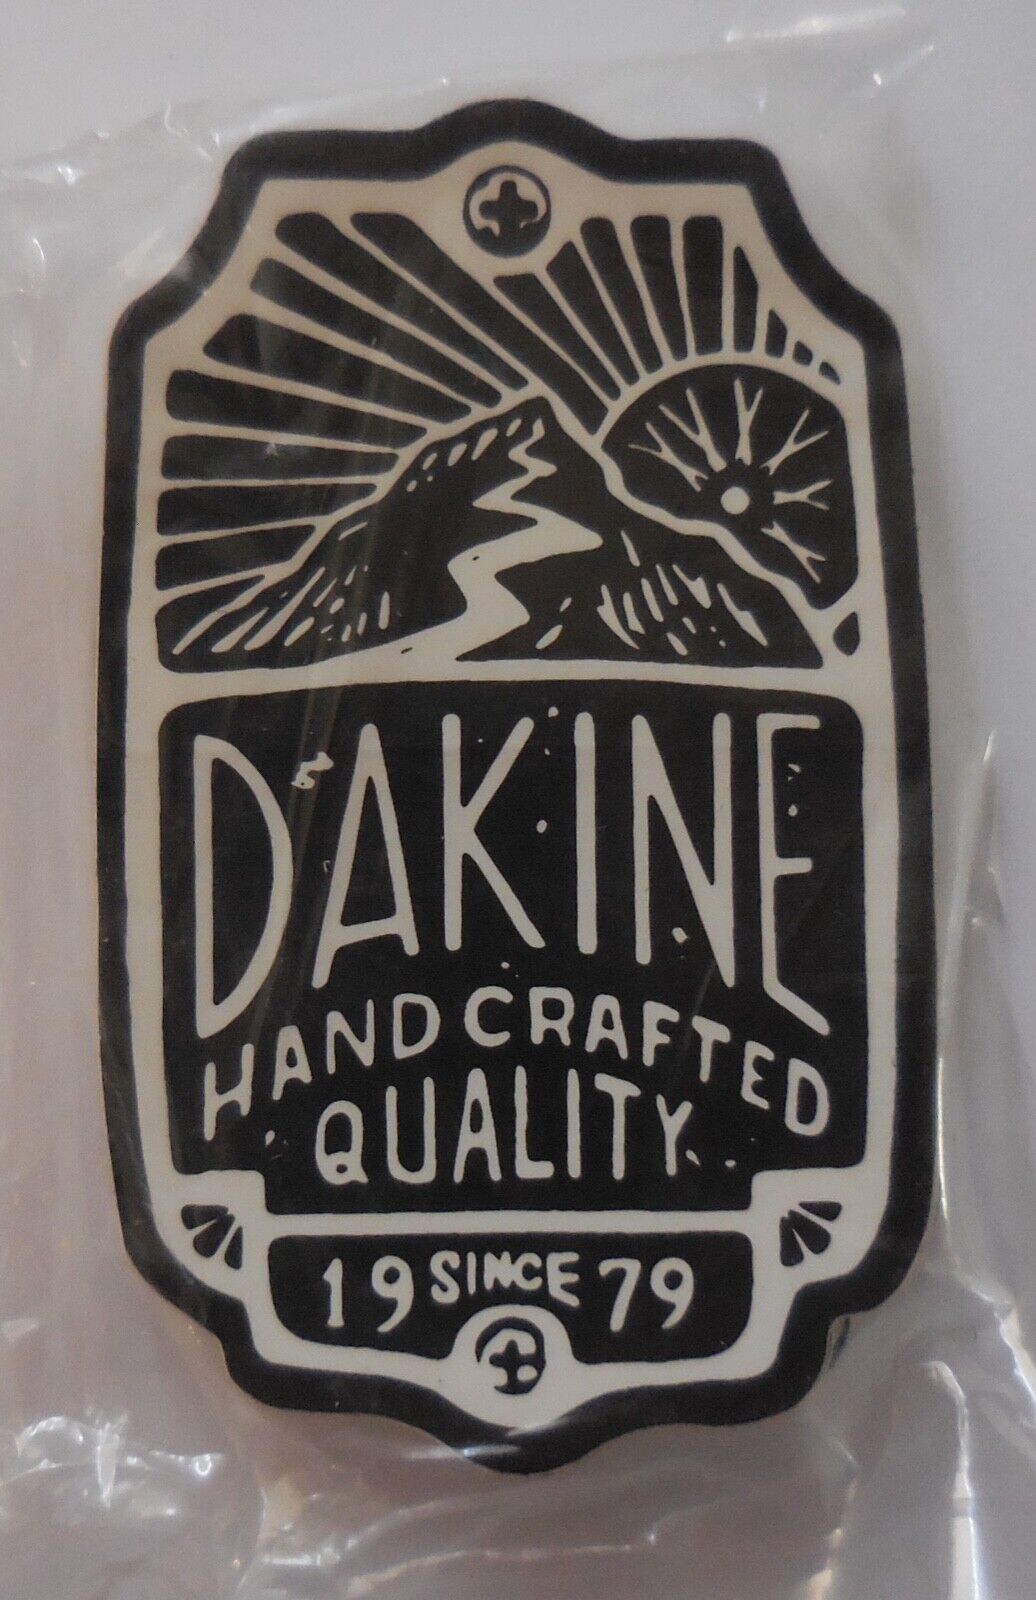 Dakine Hand Crafted Quality 19 Since 79 Stickers Set of 25 New in Pack